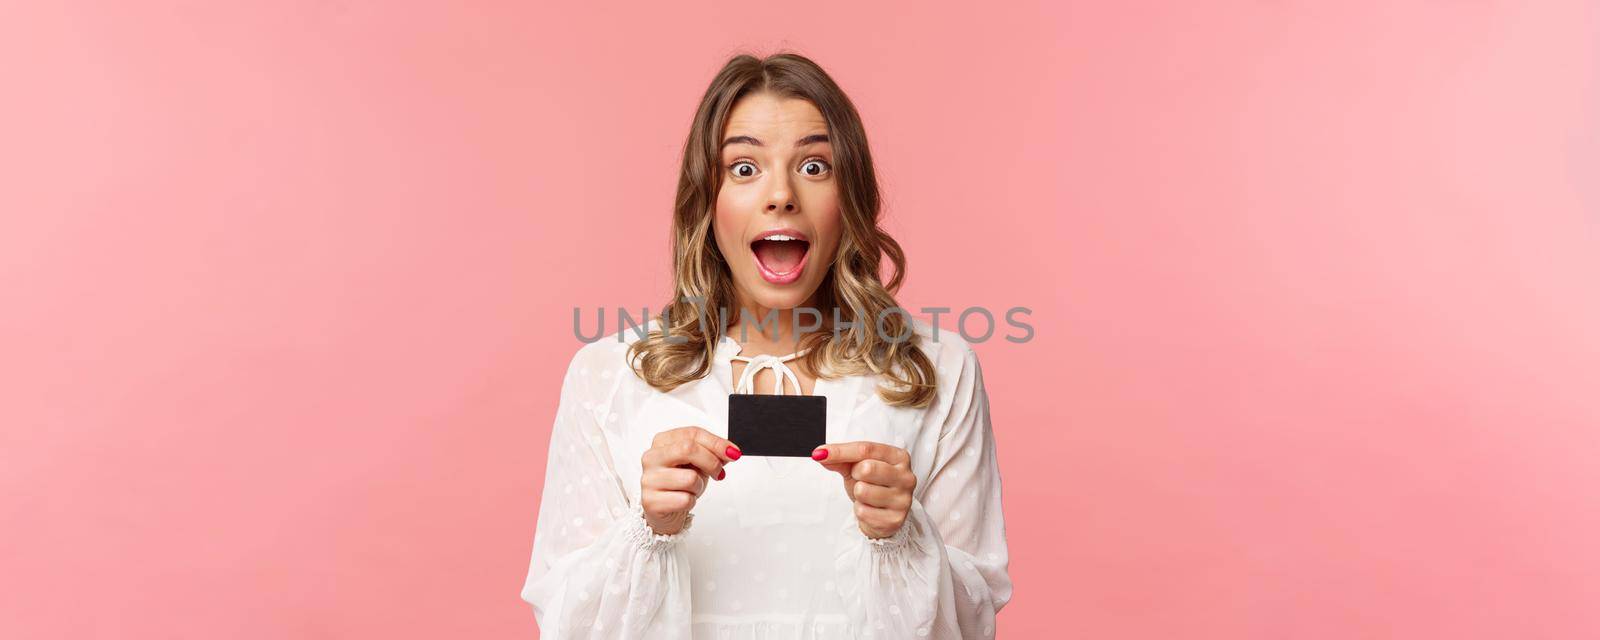 Close-up portrait of emotive, excited and thrilled good-looking blond girl showing credit card and feeling very happy, telling about discounts, special offers, bank service, pink background.